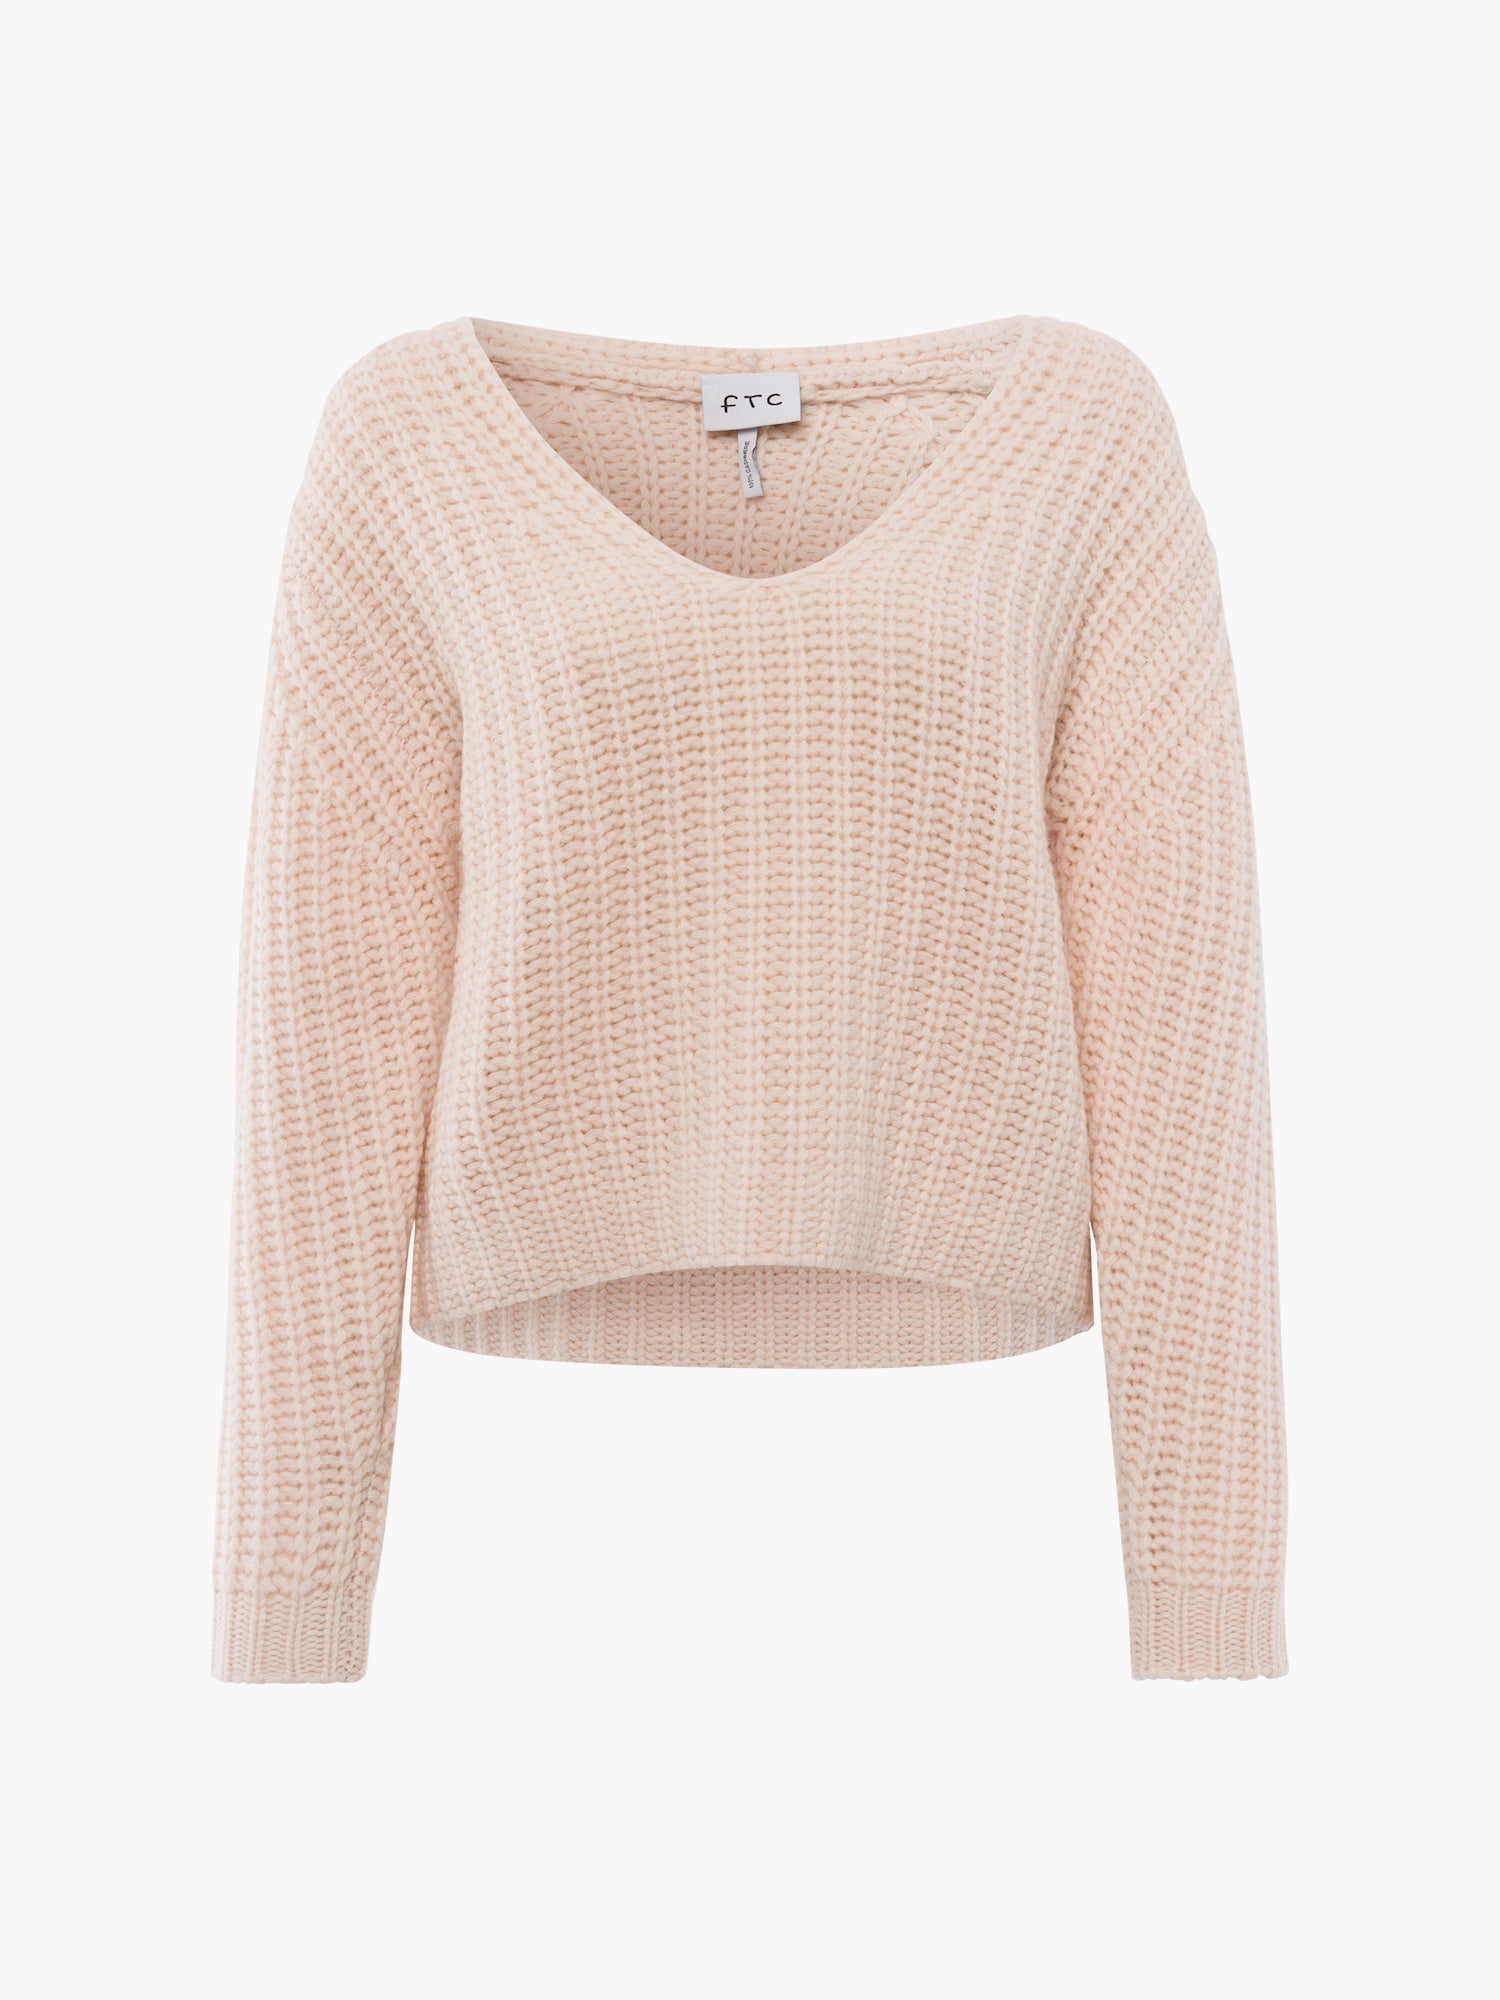 FTC-Cashmere-OUTLET-SALE-Pullover-VN-Strick-ARCHIVE-COLLECTION_2958f6fd-3f5d-4bf3-bc0a-852ebb2f9018.jpg